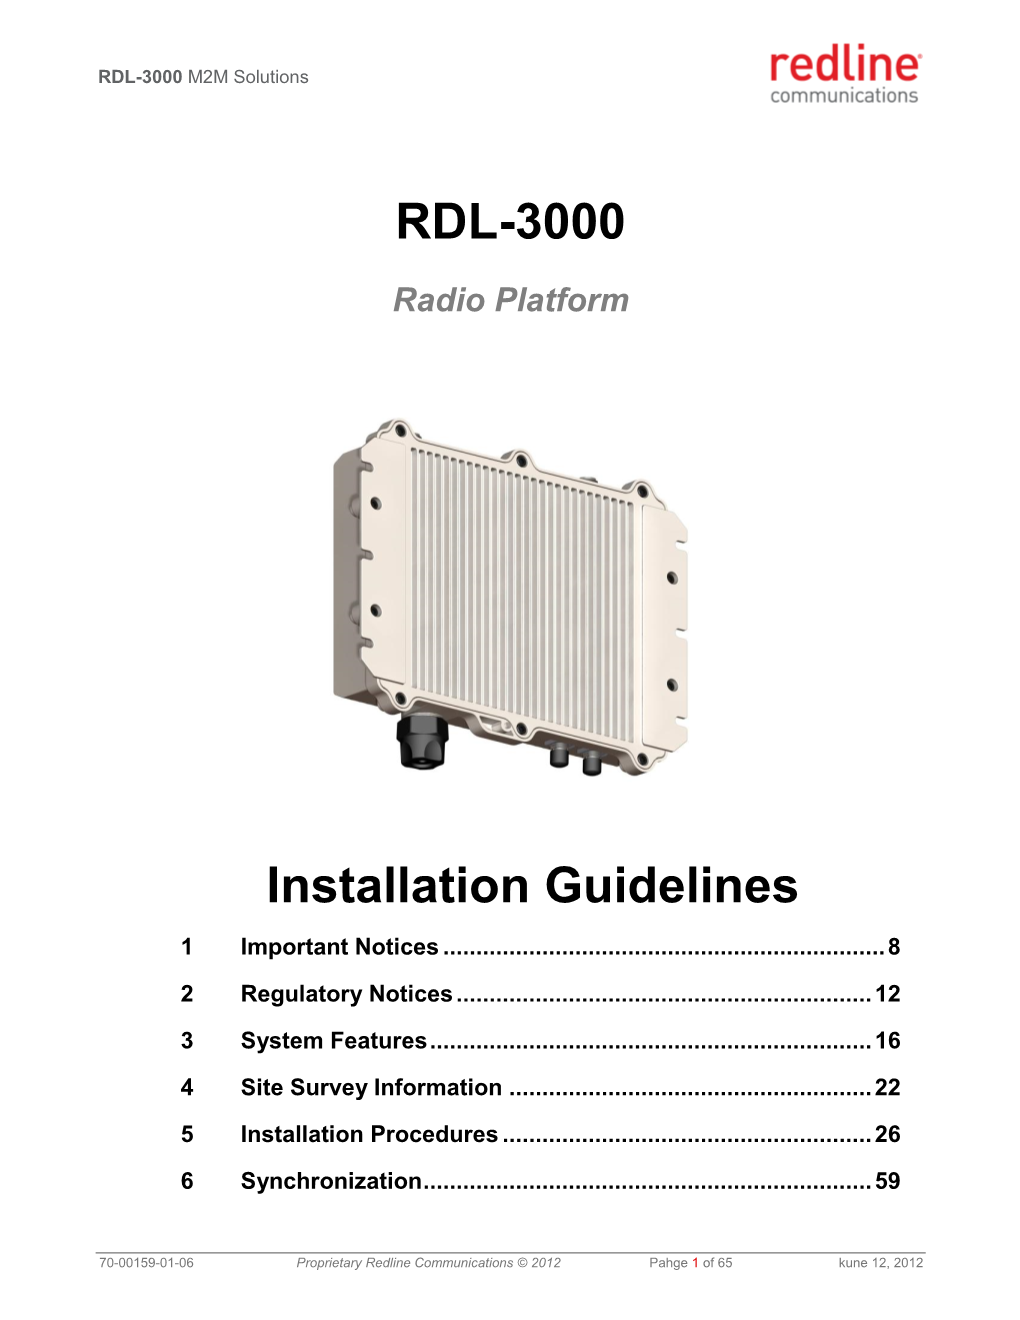 Rdl-3000 Installation Guidelines